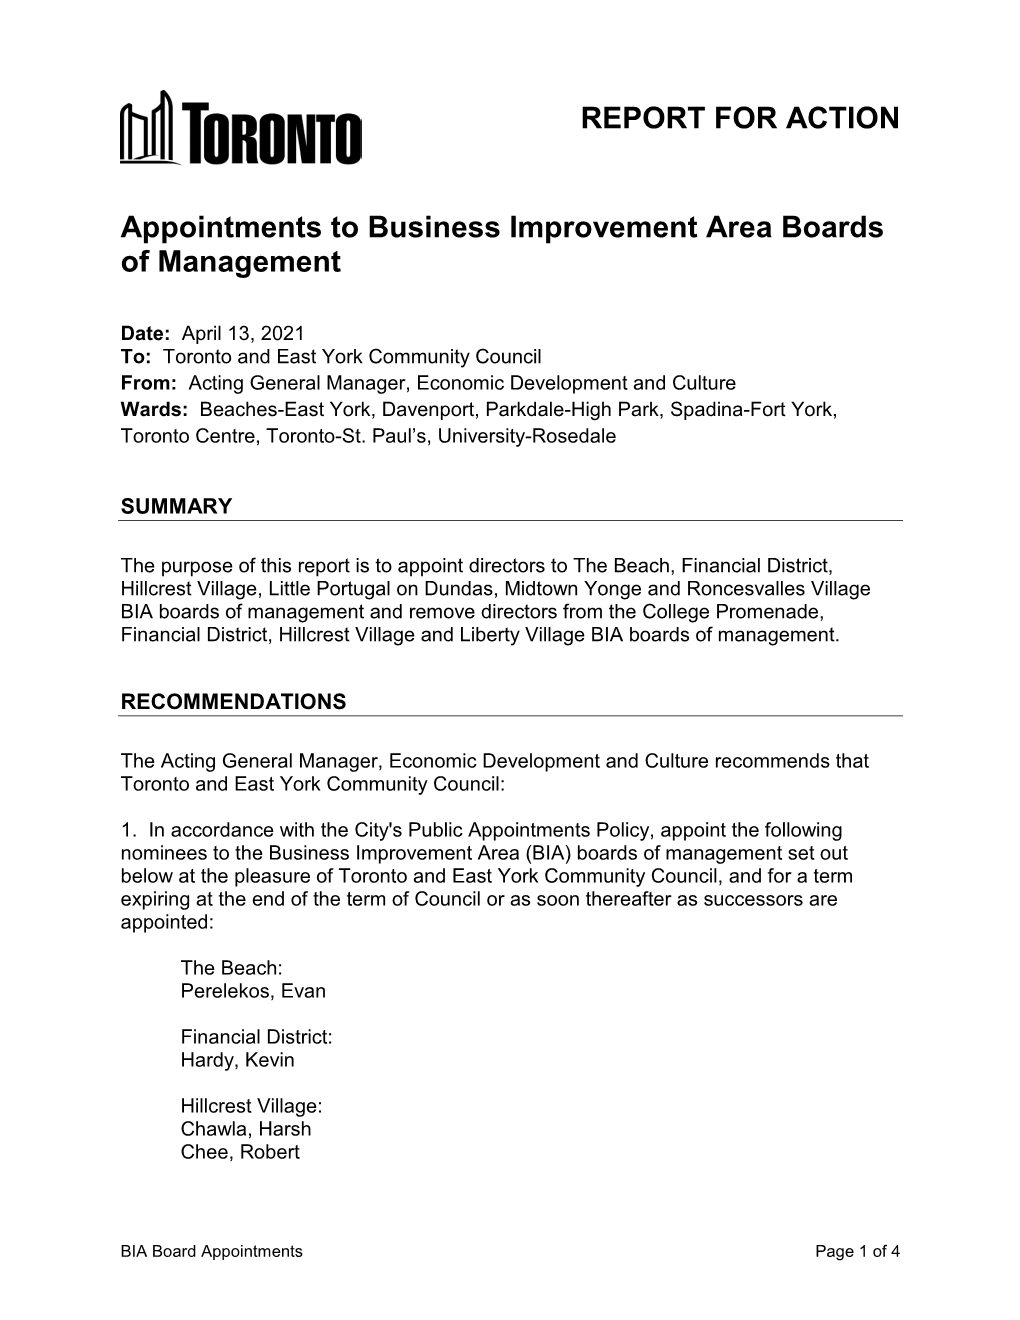 Appointments to Business Improvement Area Boards of Management